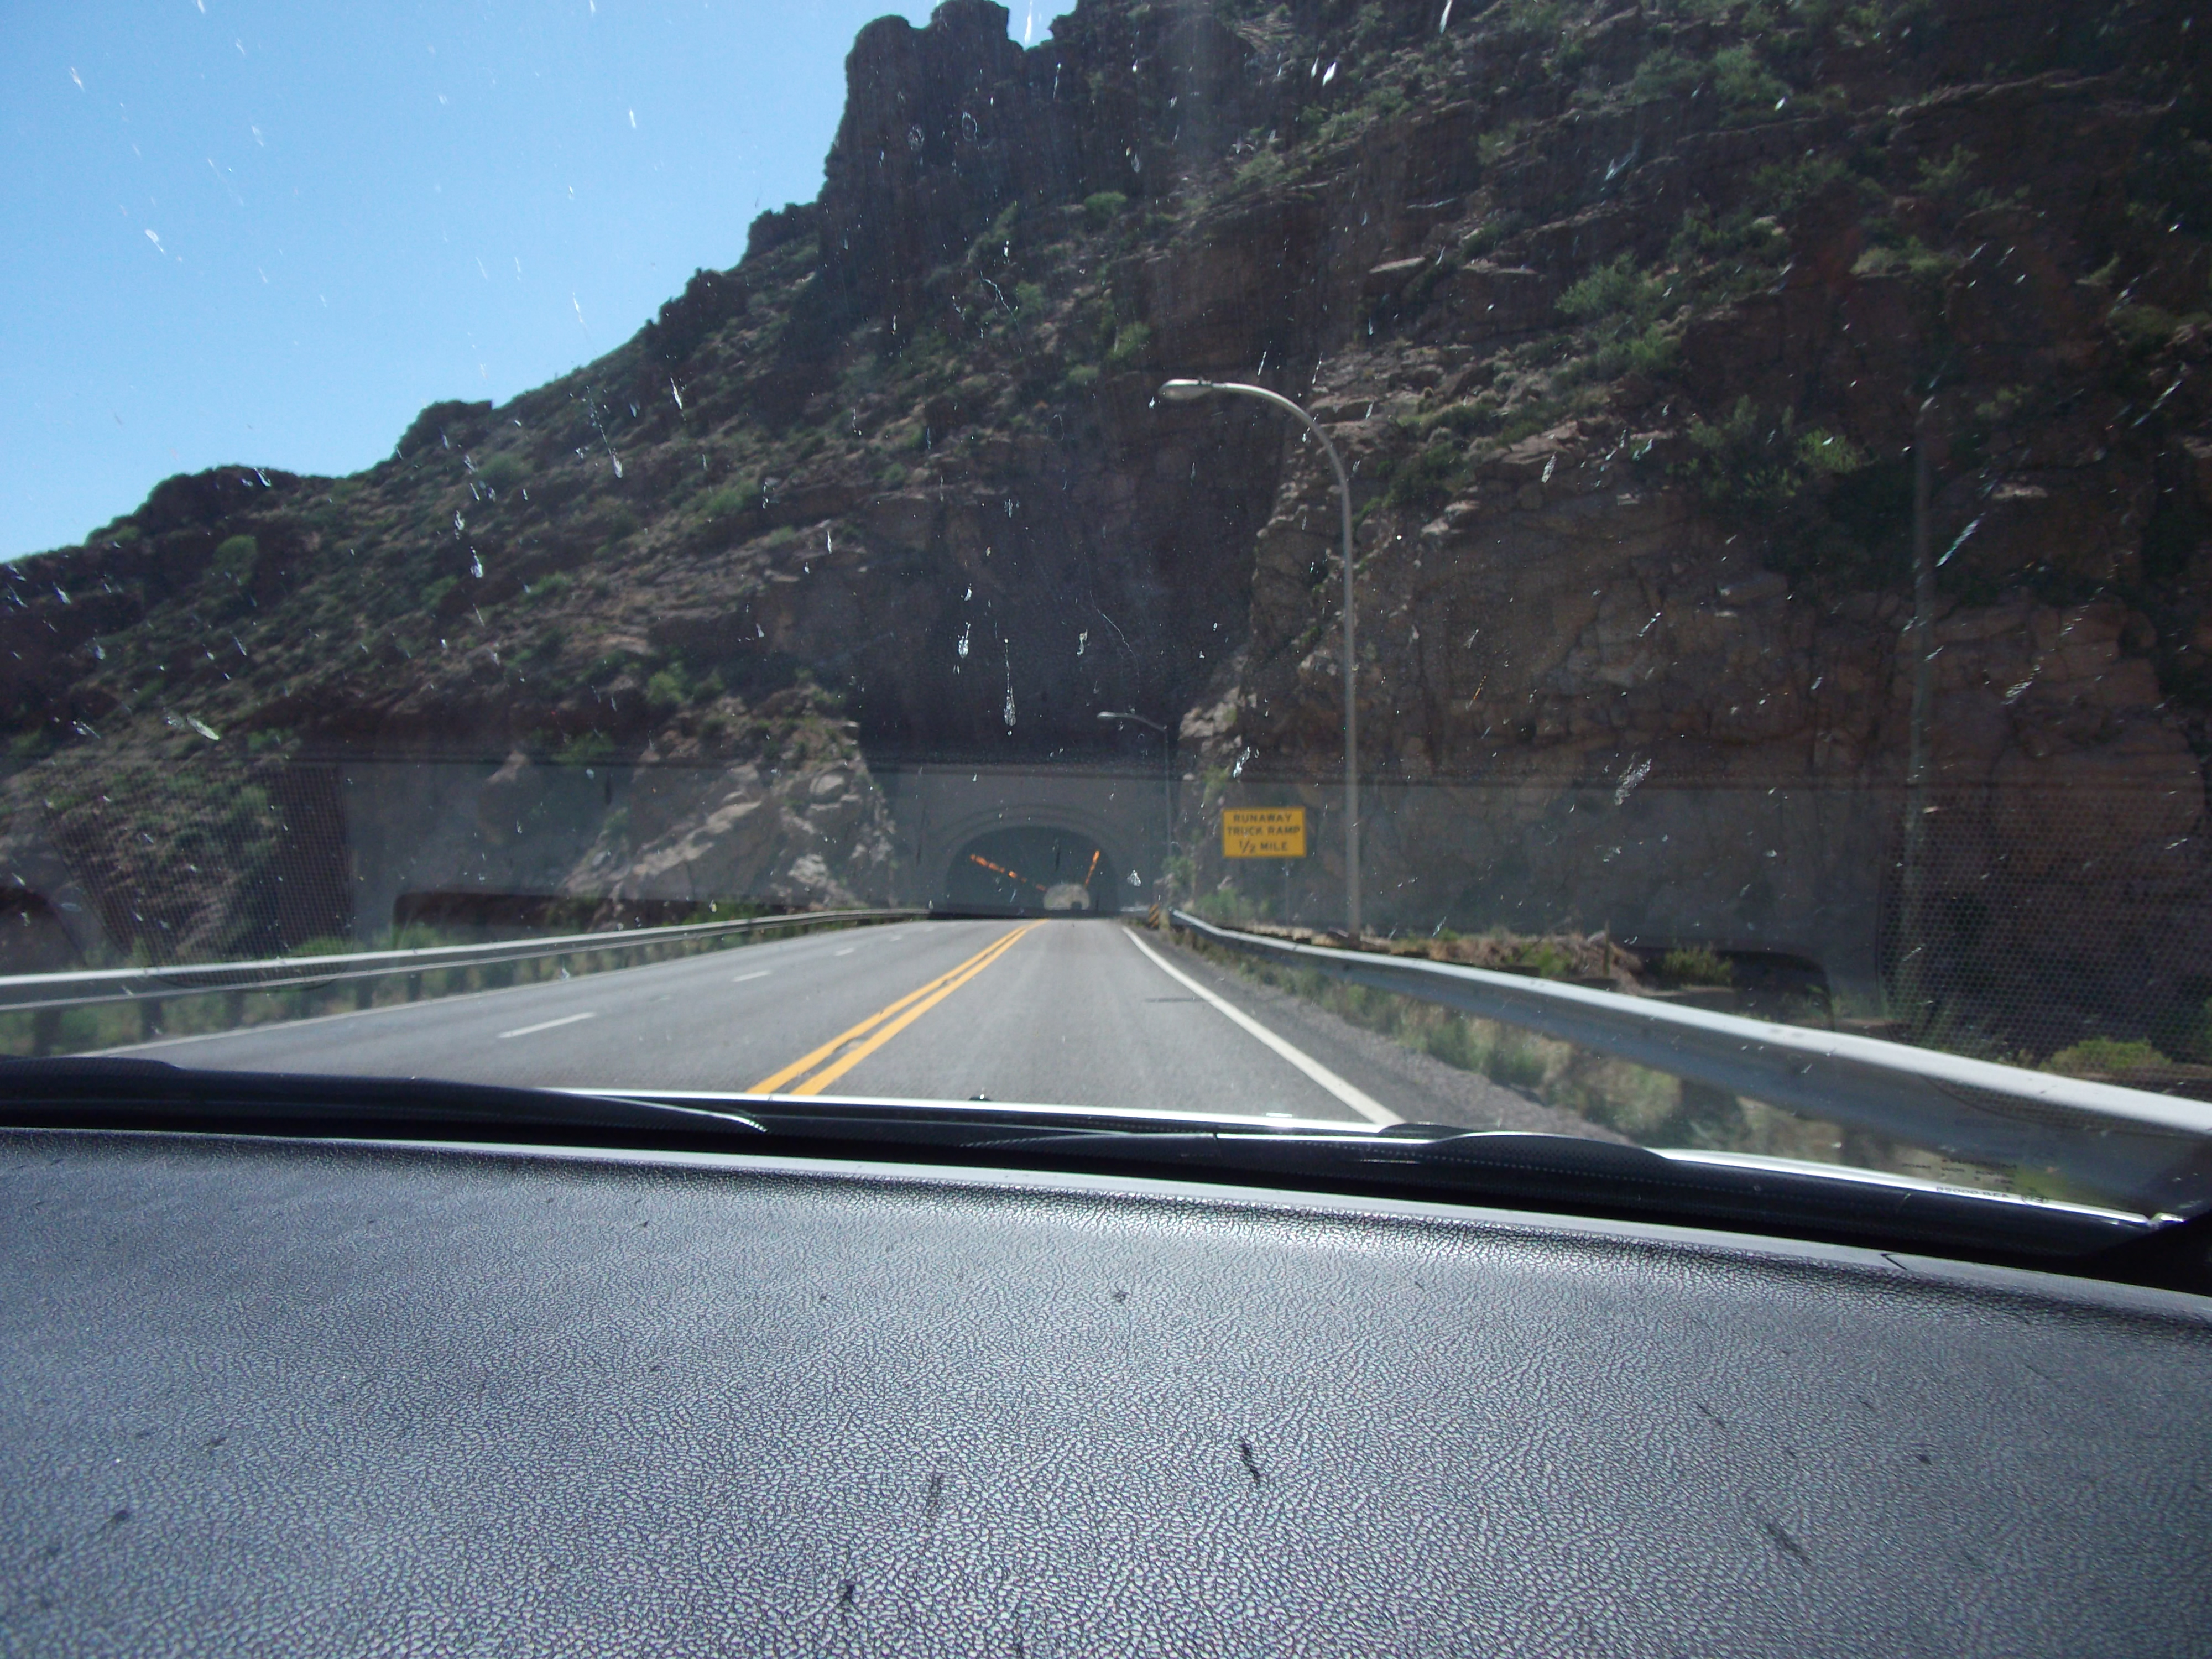 The sign says Runaway Truck ramp  1/2 mile